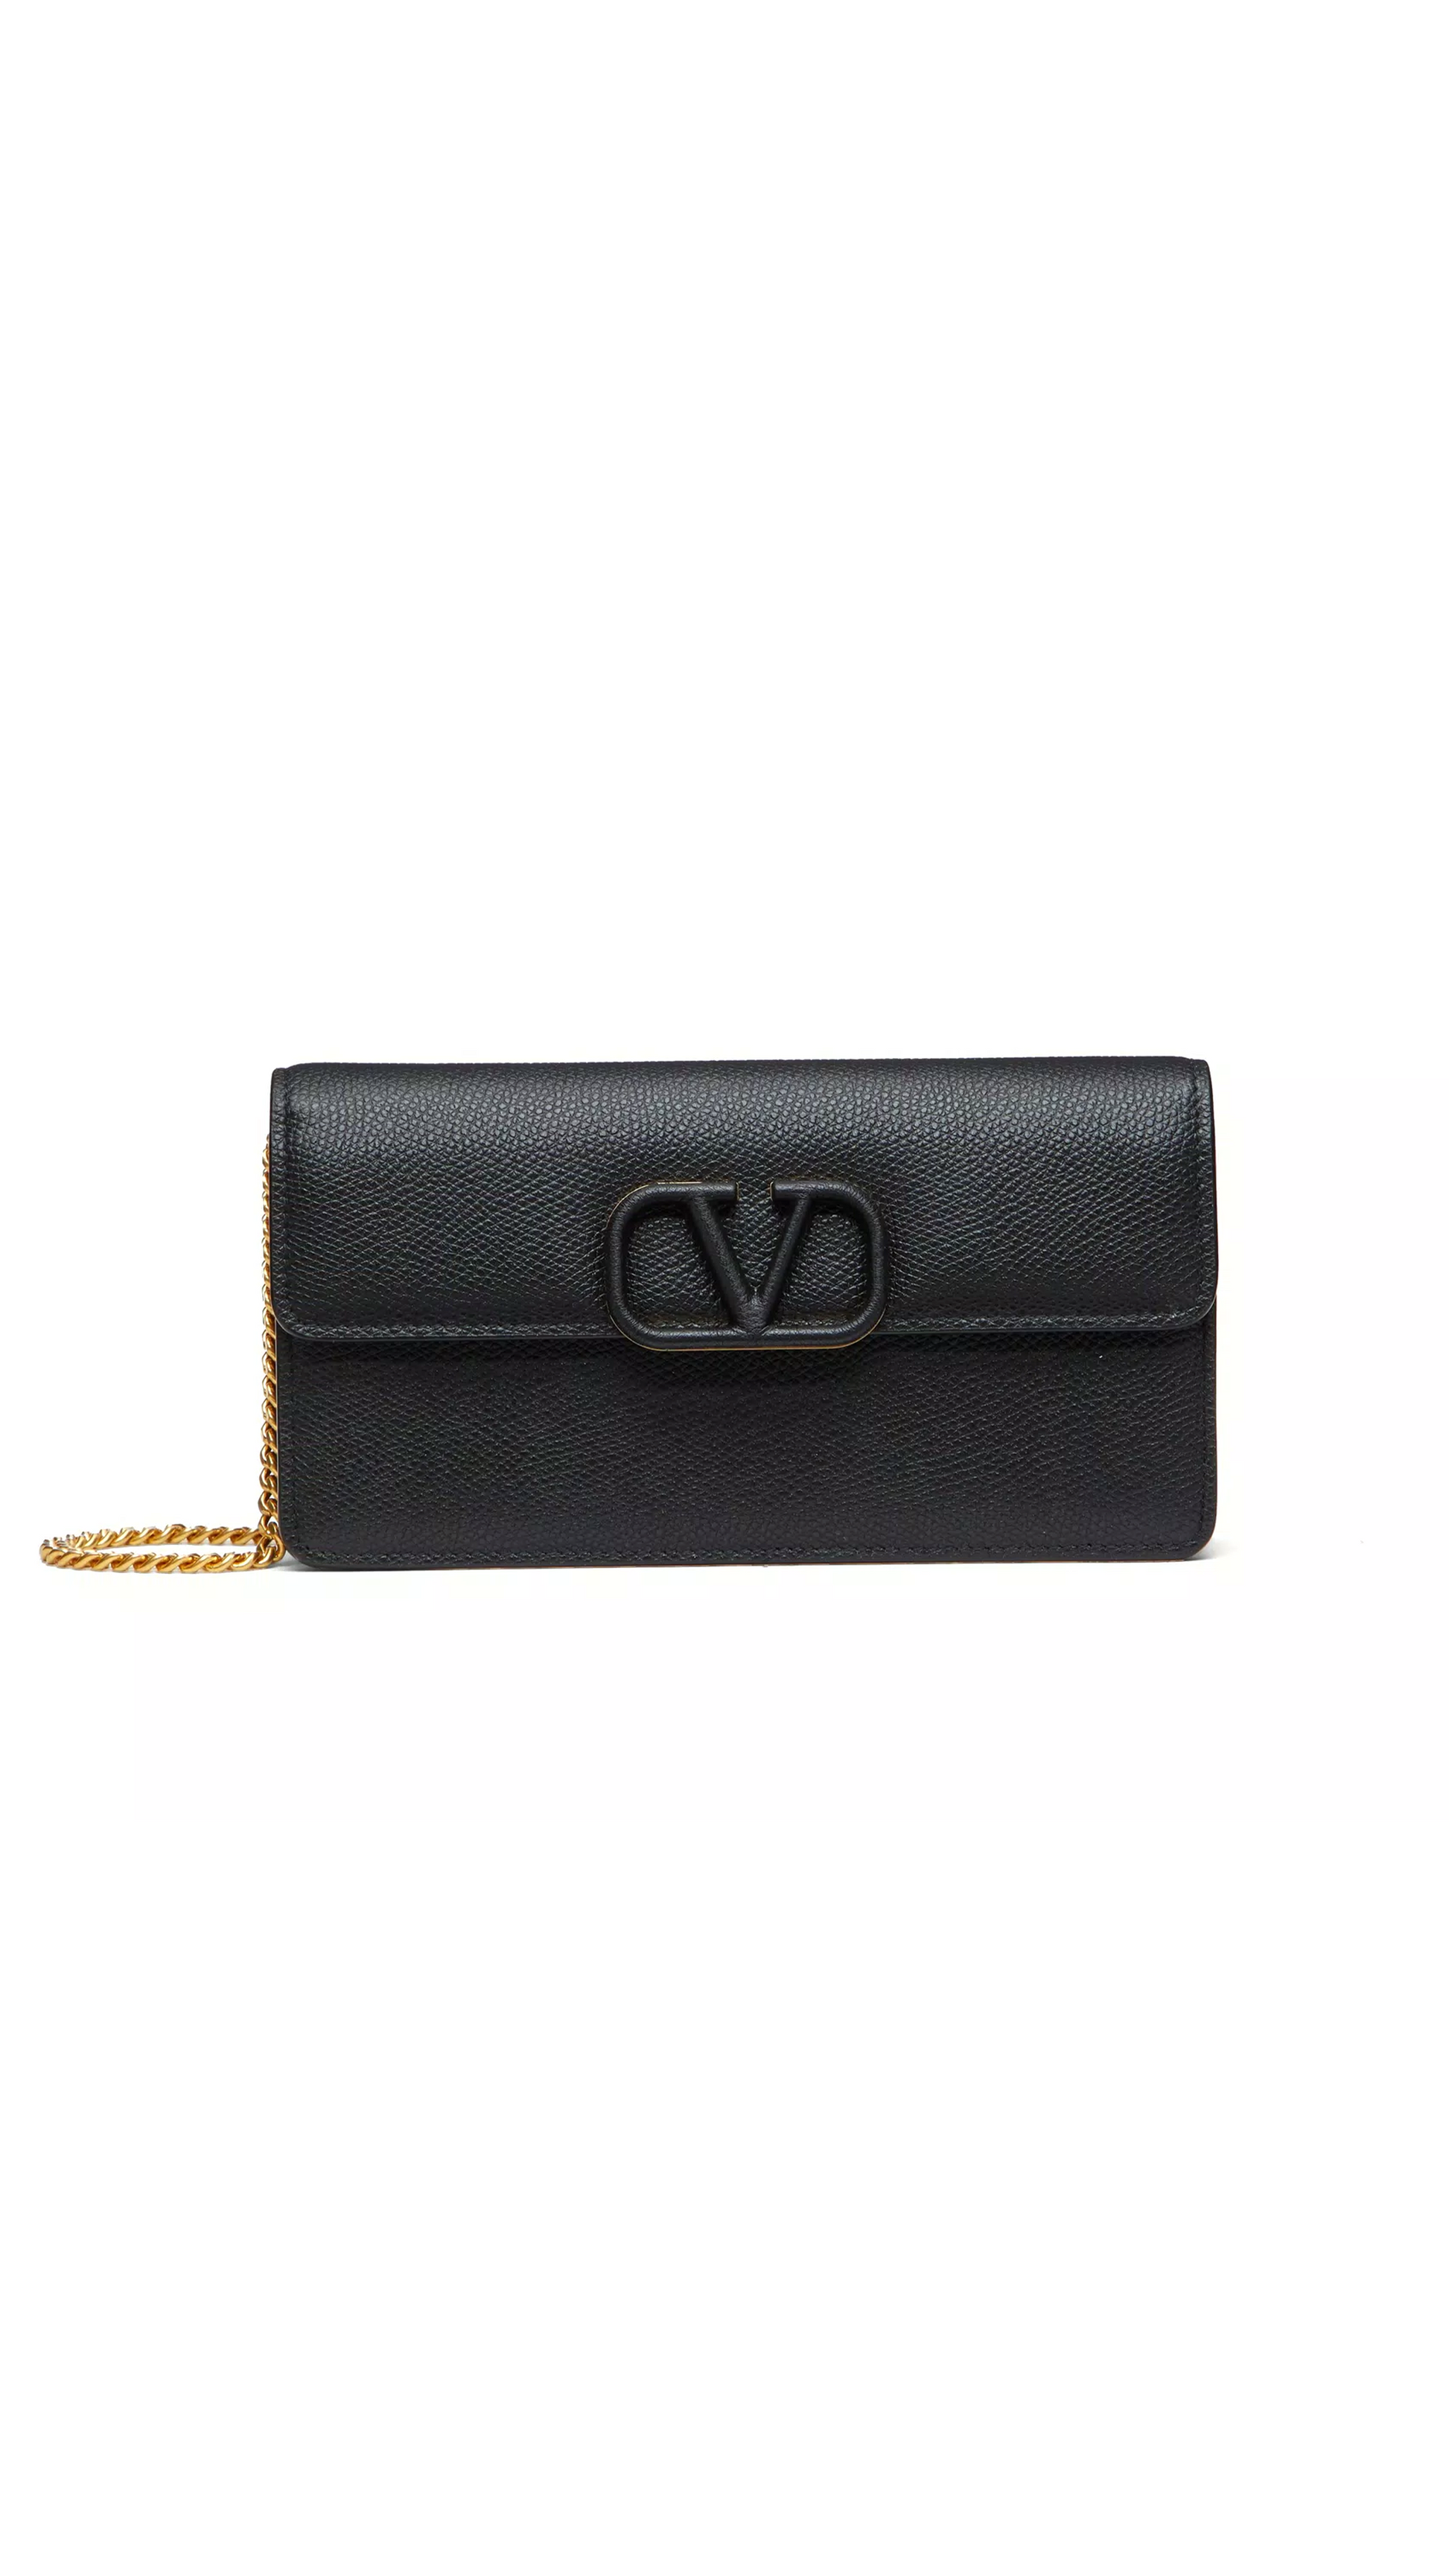 Valentino VLogo Signature Grainy Calfskin Wallet With Chain